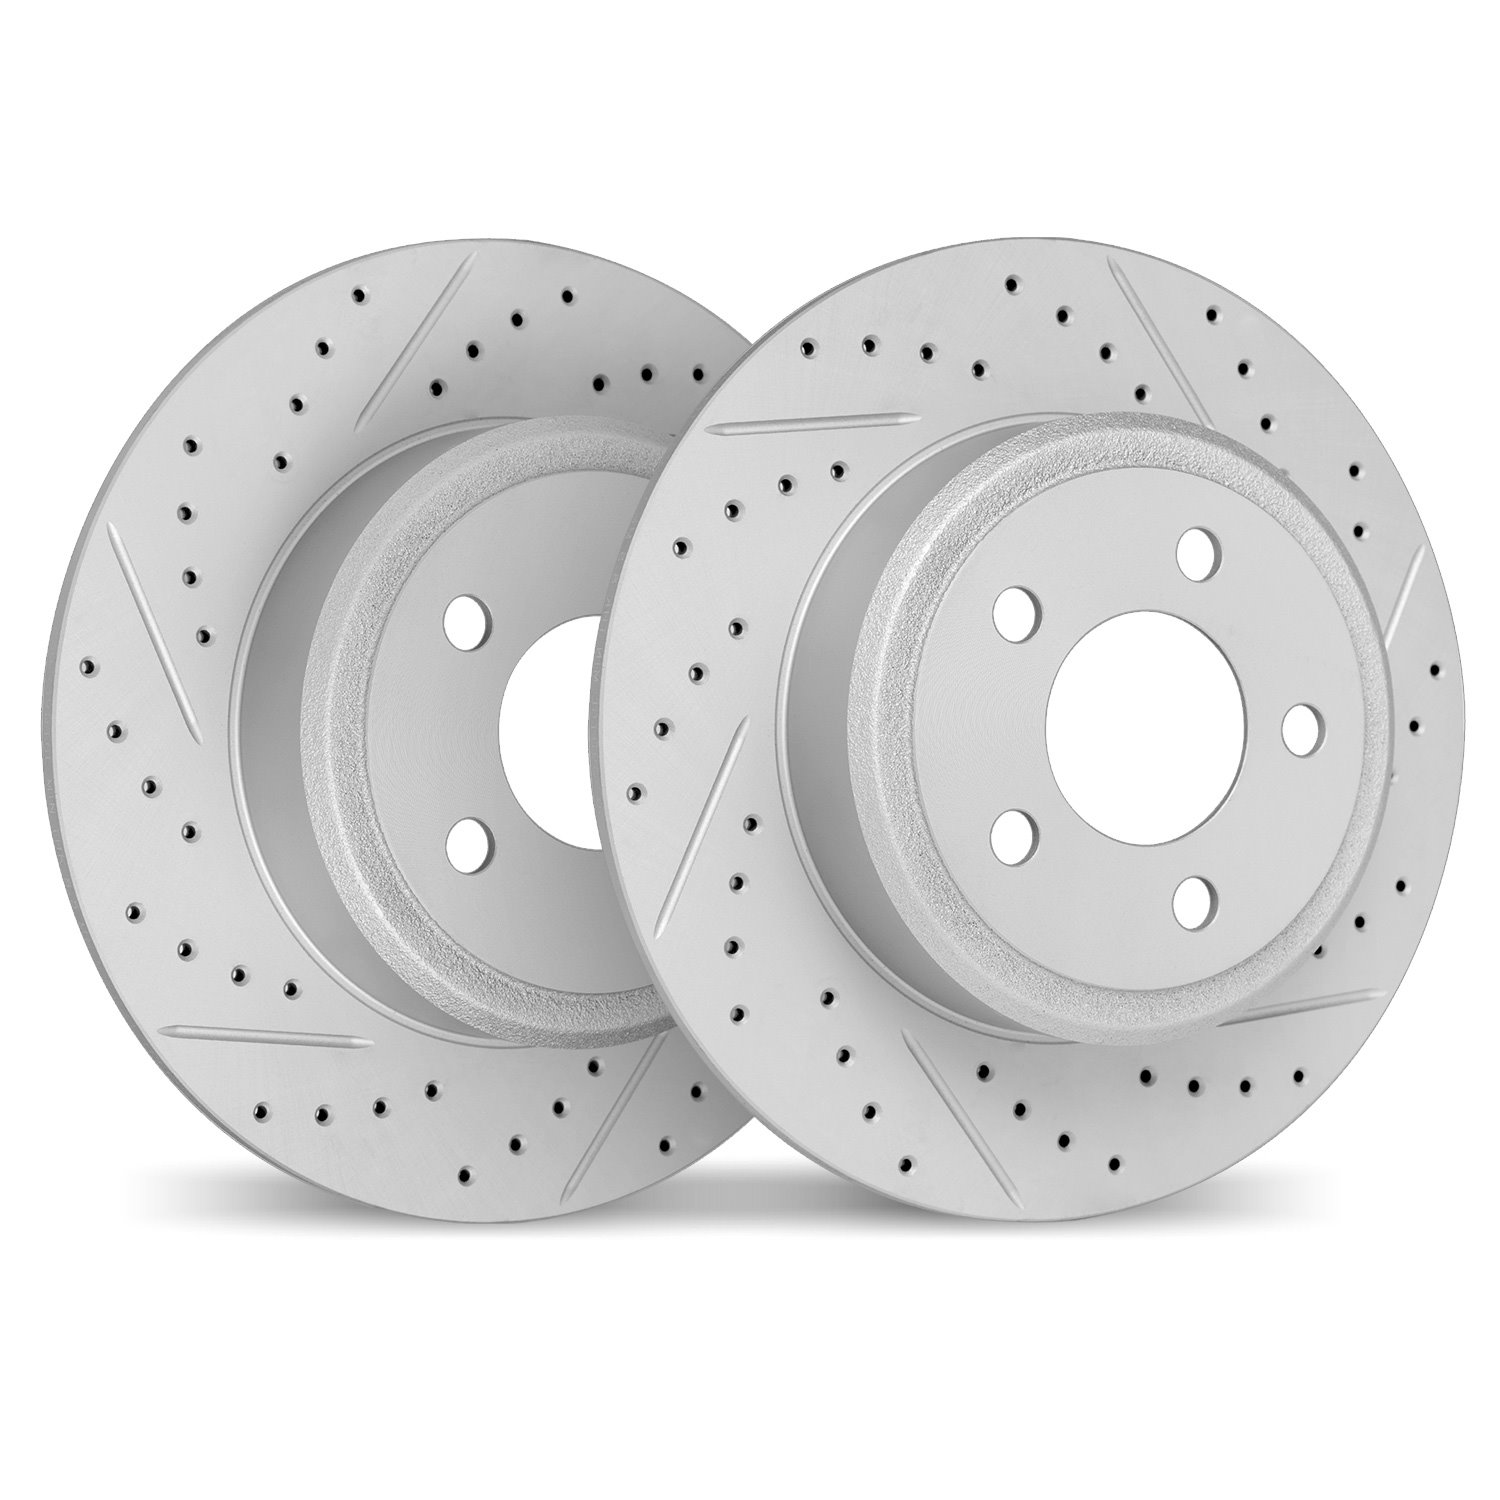 2002-54173 Geoperformance Drilled/Slotted Brake Rotors, 1993-2005 Ford/Lincoln/Mercury/Mazda, Position: Rear